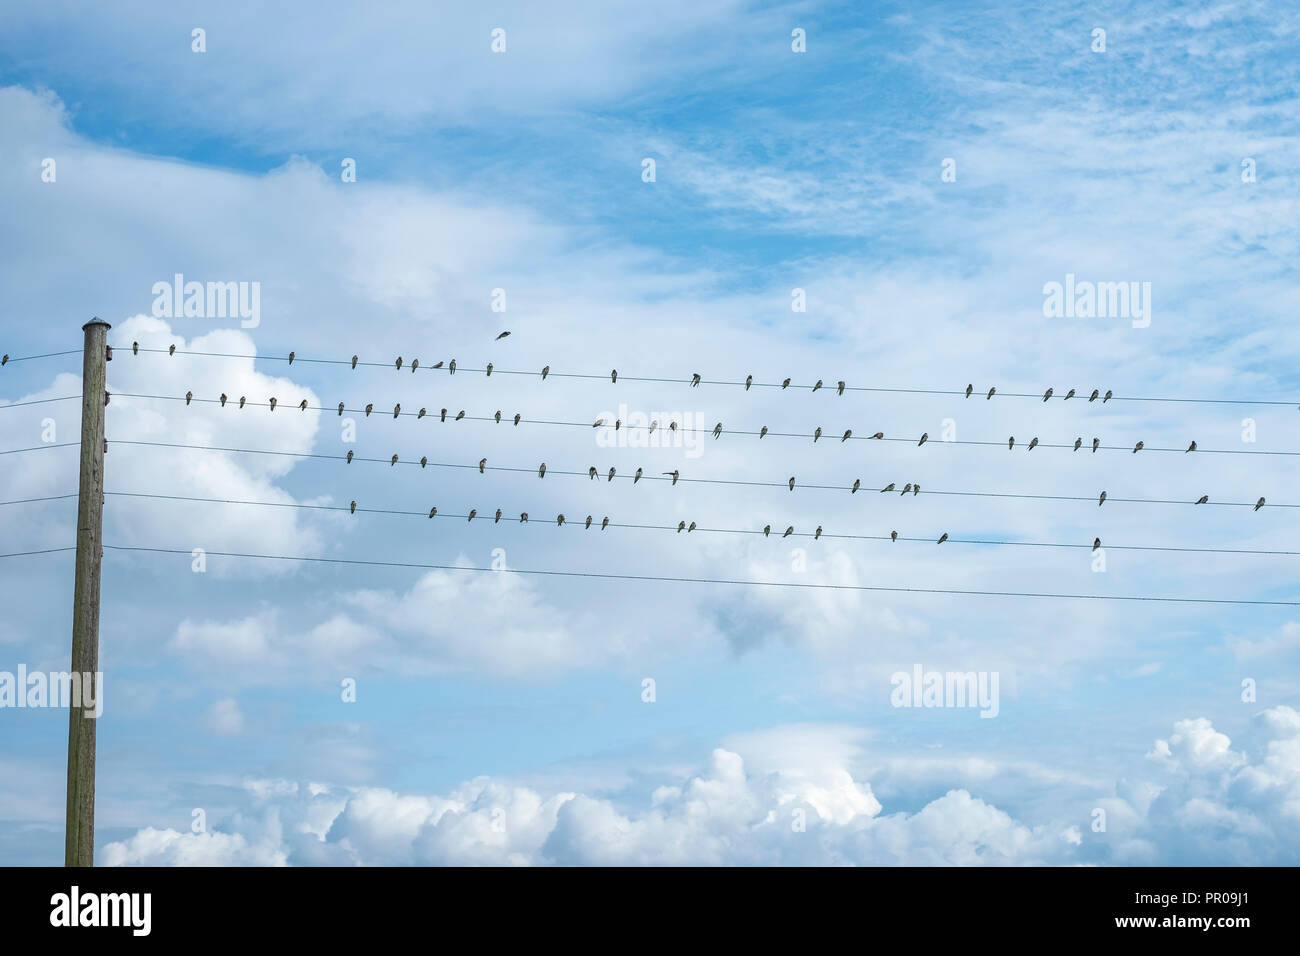 Migratory birds lined up on wires in the port of Nyord (Nyord Havn) on the island of Nyord, Denmark, Scandinavia, Europe. Stock Photo